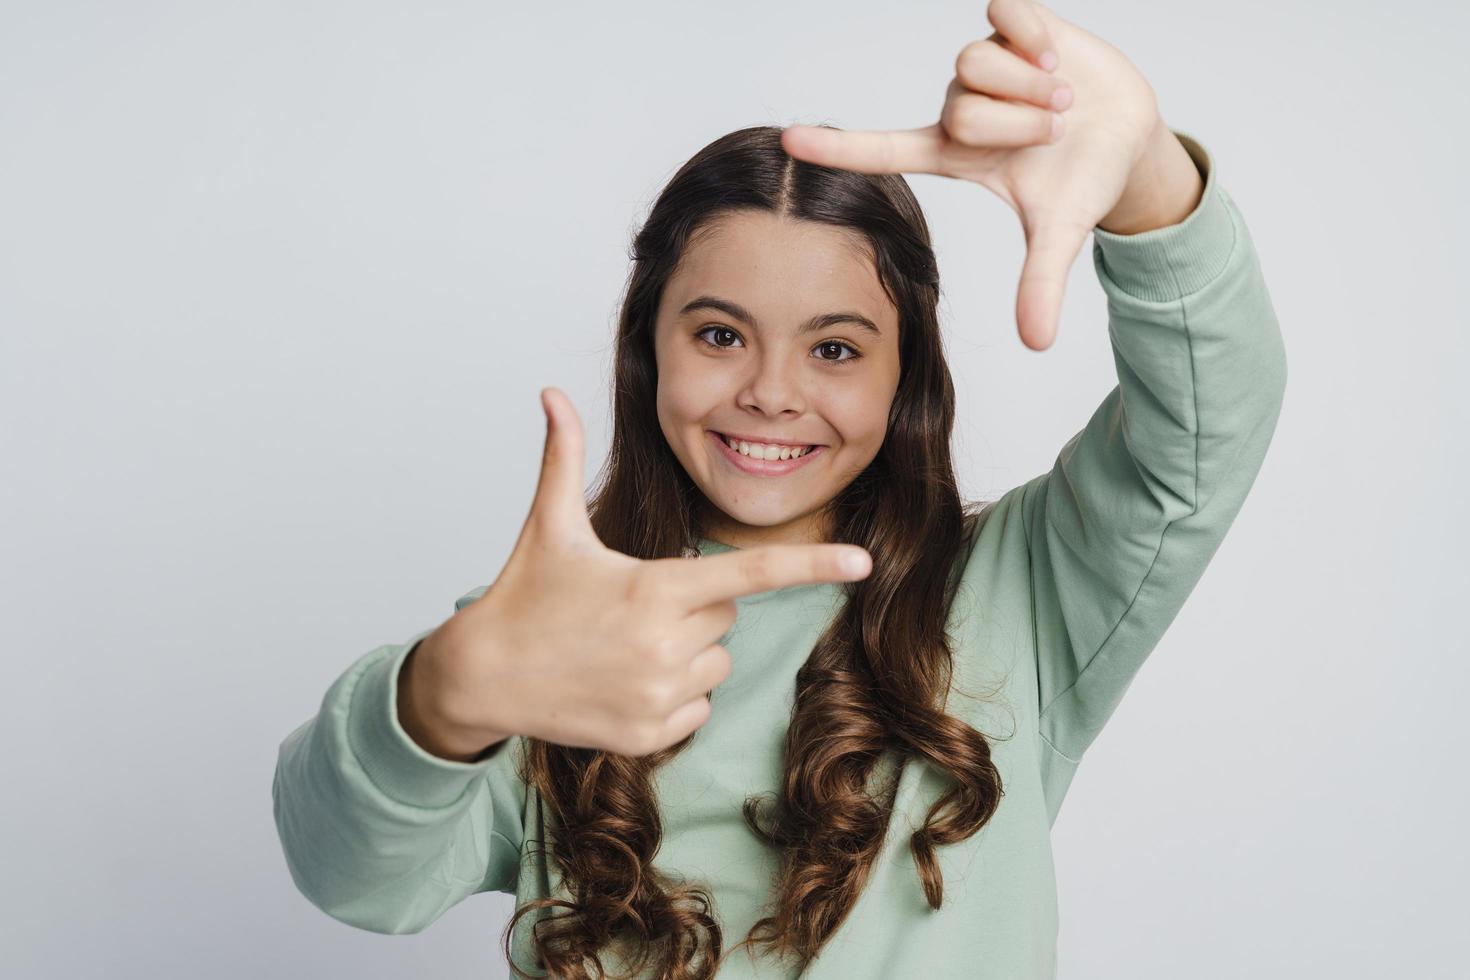 Smiling, positive girl posing on a white wall background photo